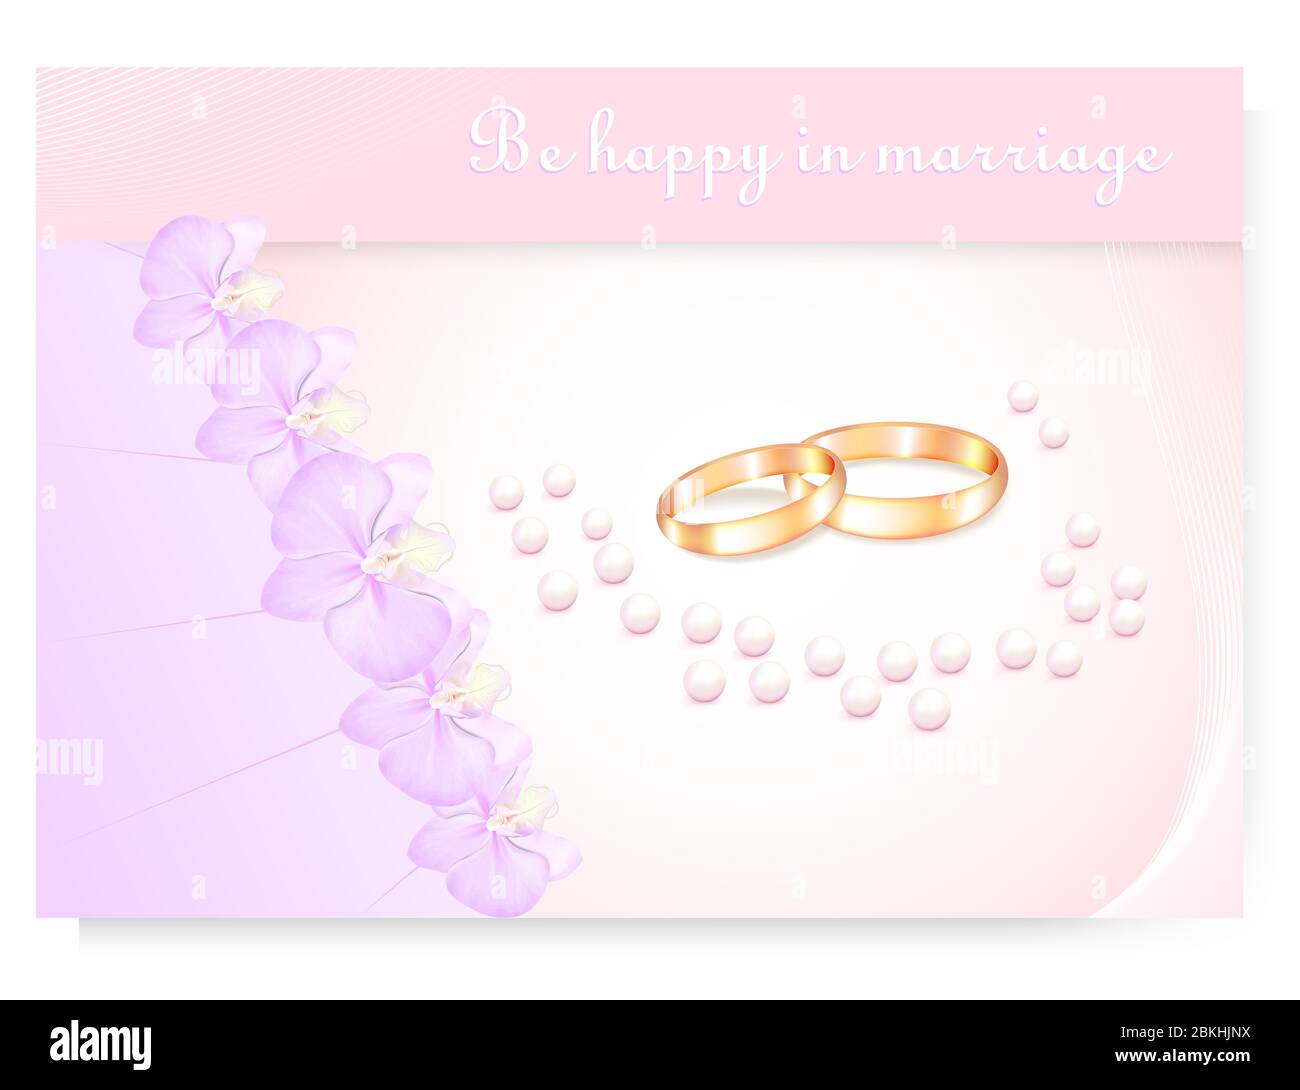 Congratulation on a happy wedding with golden wedding rings, pink orchids, sprinkled pearls on a peach color background Stock Photo